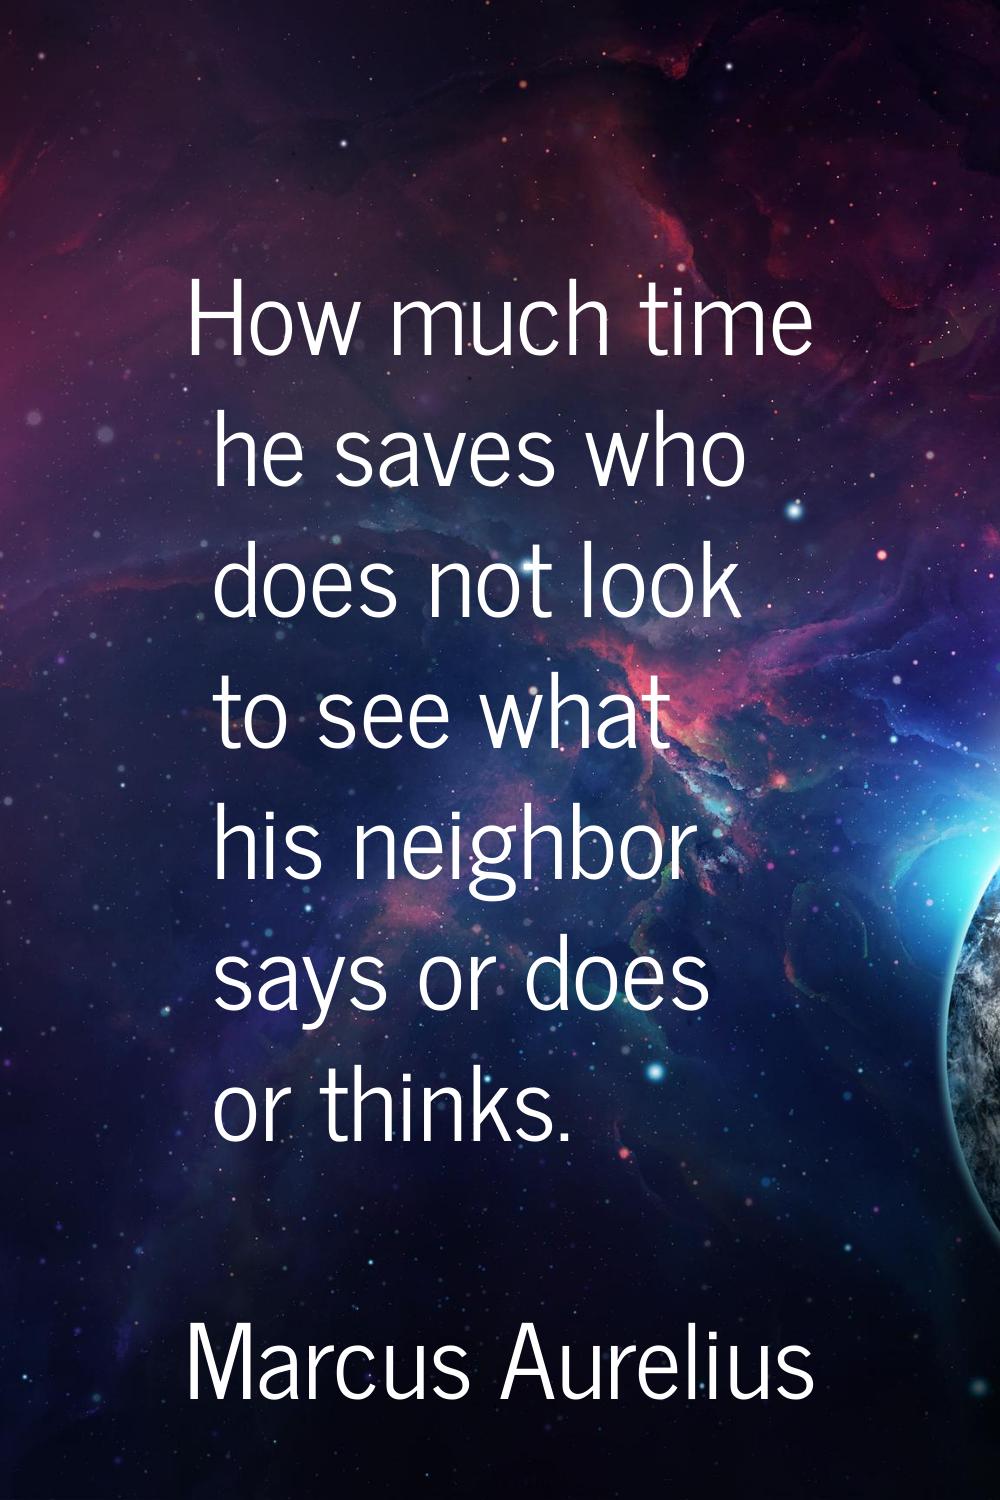 How much time he saves who does not look to see what his neighbor says or does or thinks.